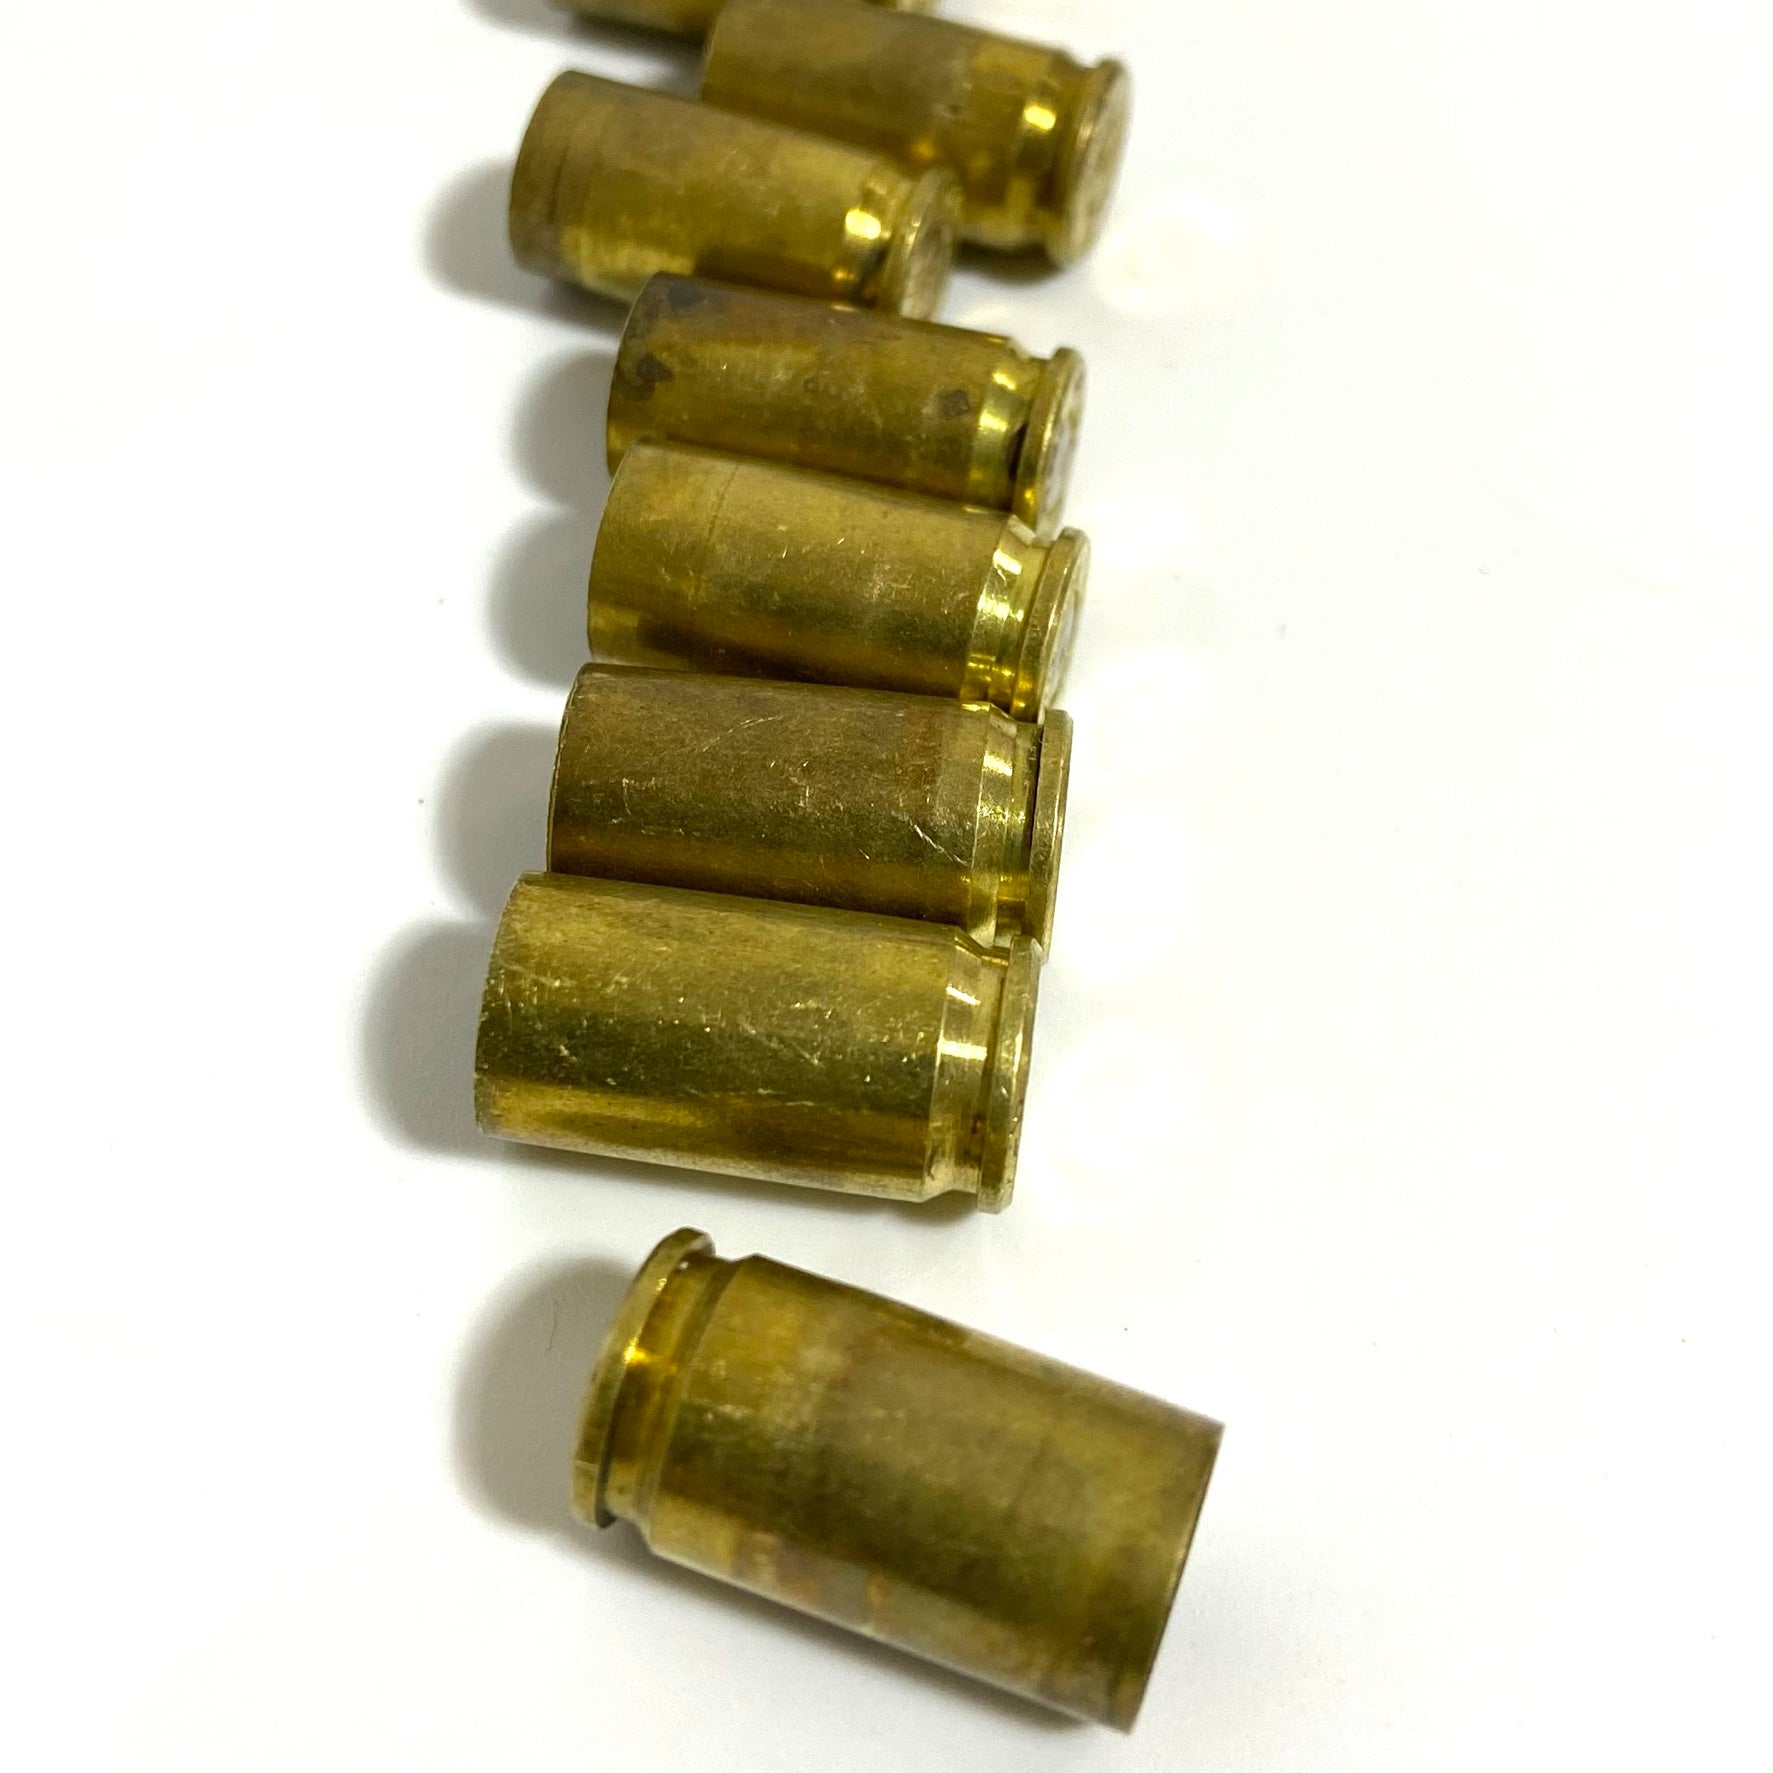 9MM Brass Shells Empty Used Spent Casings Luger 9X19 Uncleaned Unprocessed  –